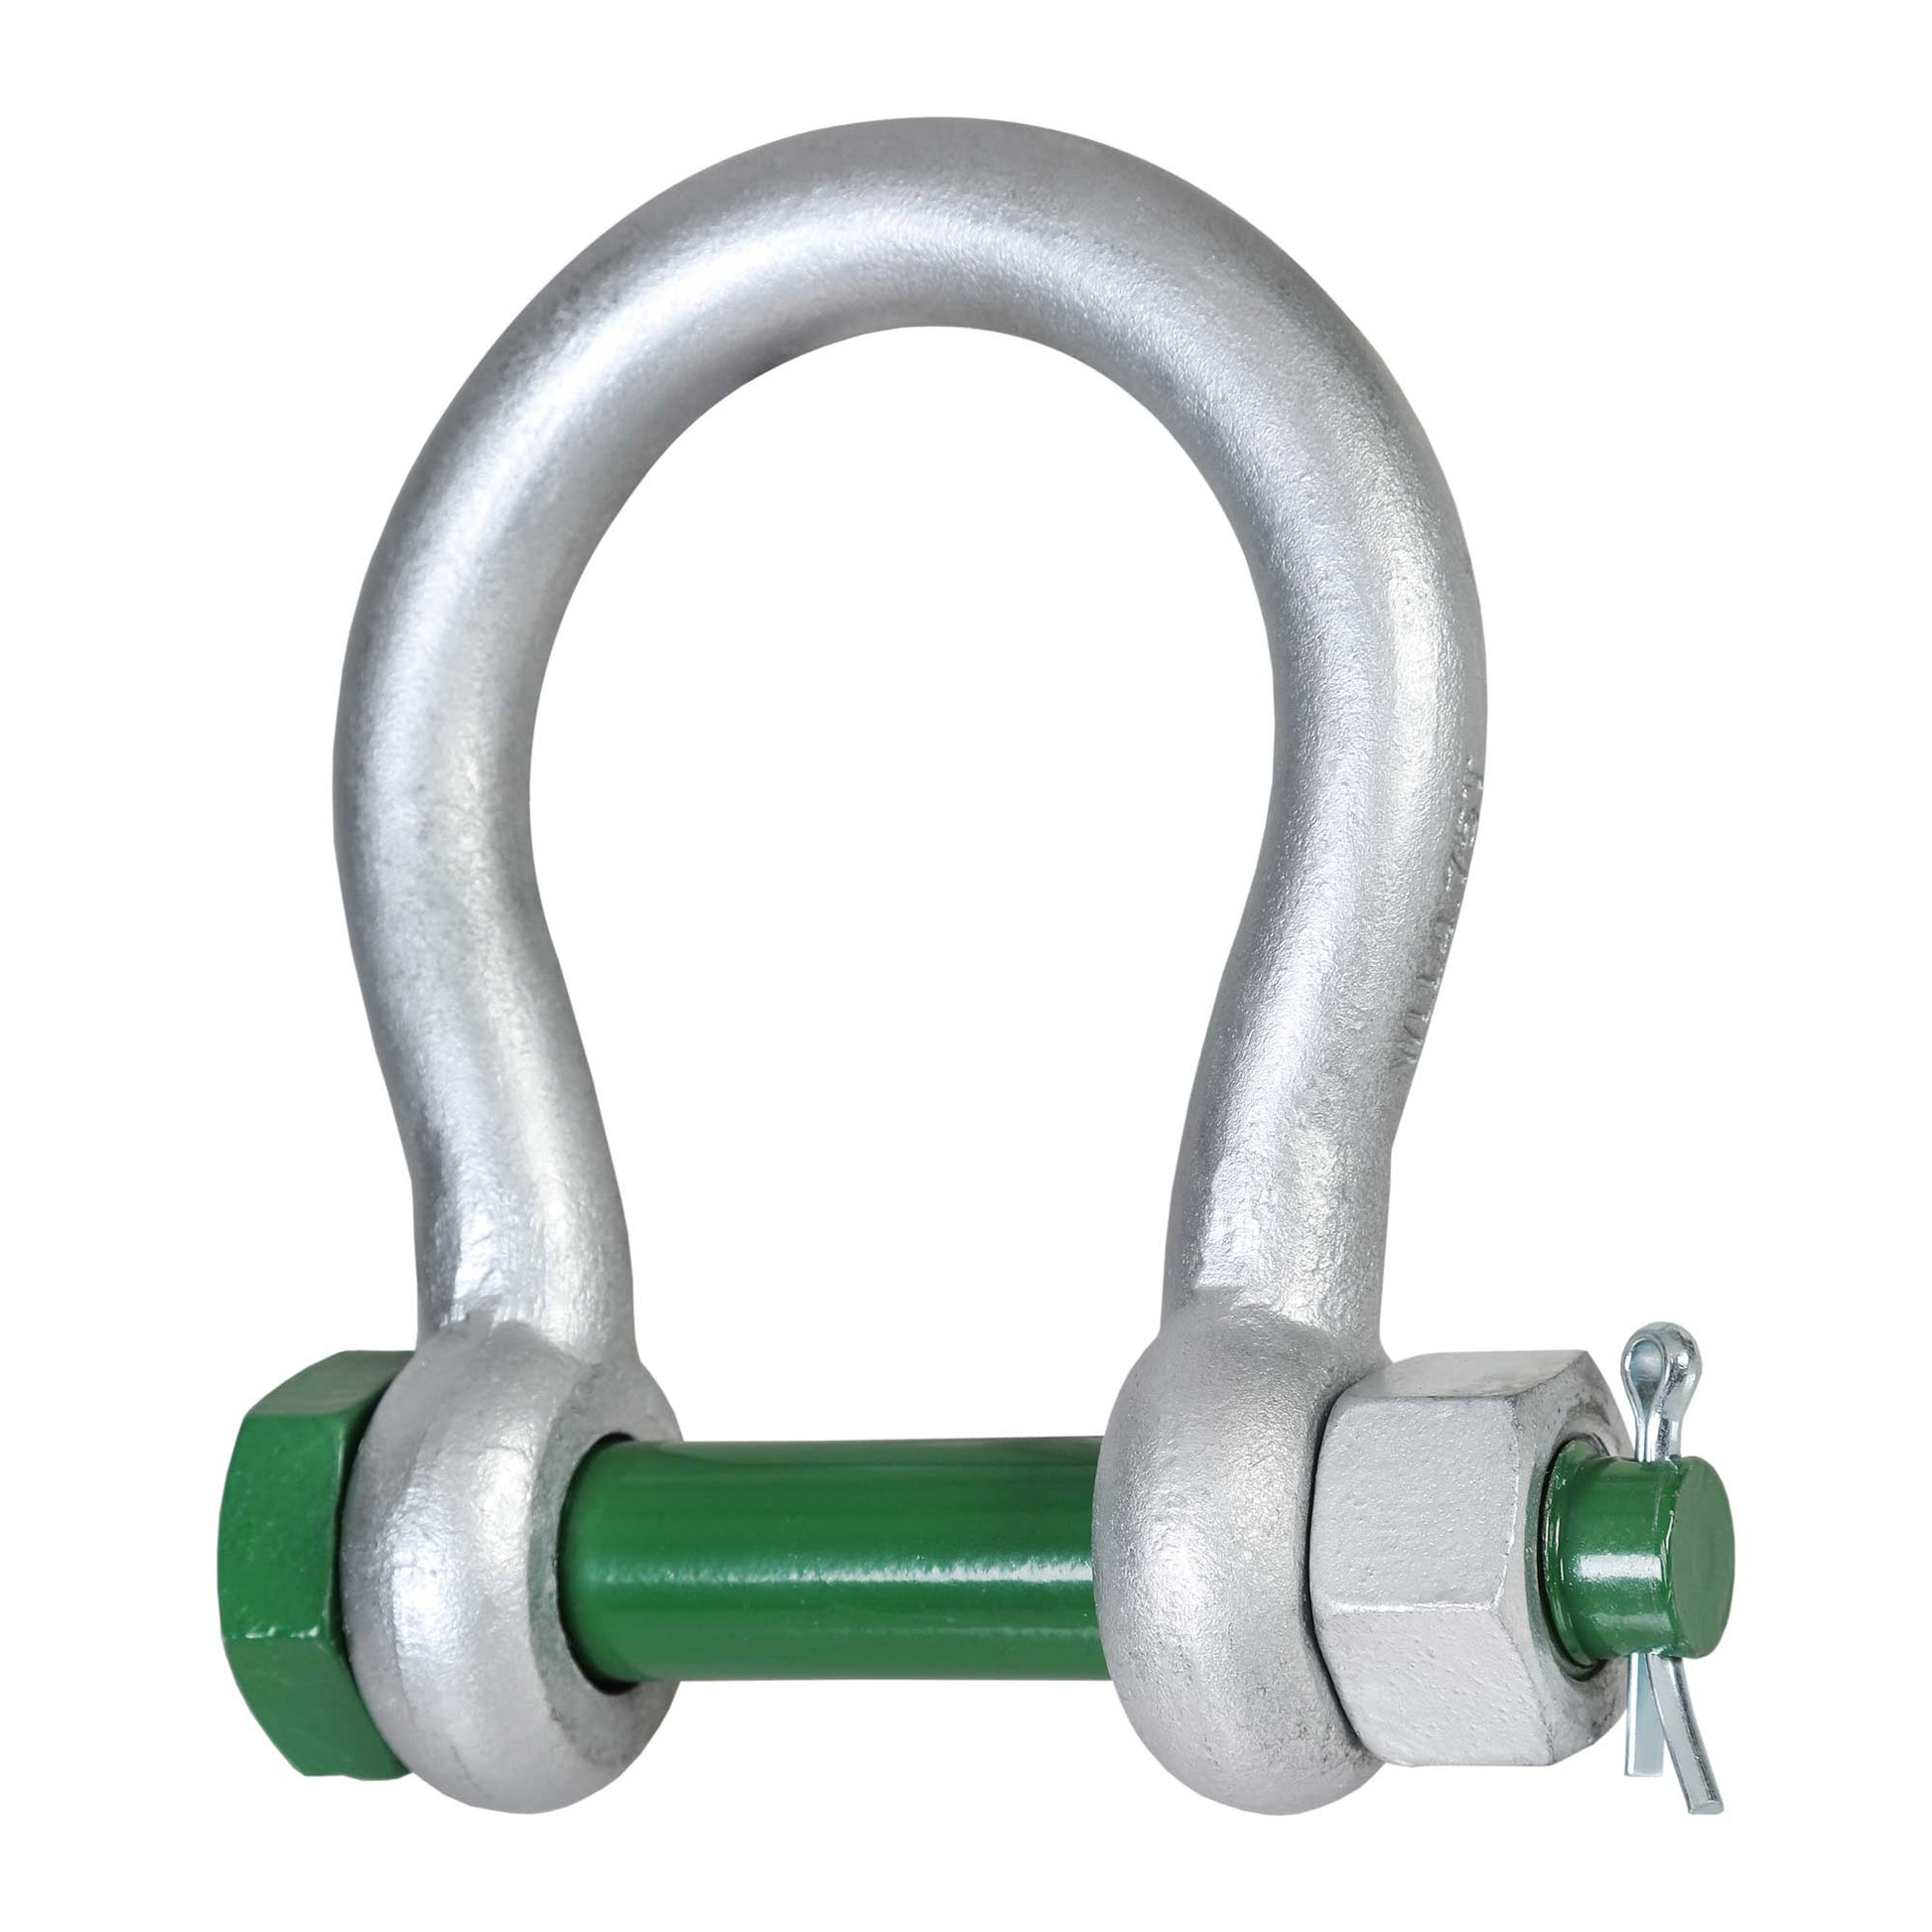 1-1/2" Van Beest Green Pin® Bolt Type Wide Mouth Towing Shackle | G-4263 - 16 Ton primary image